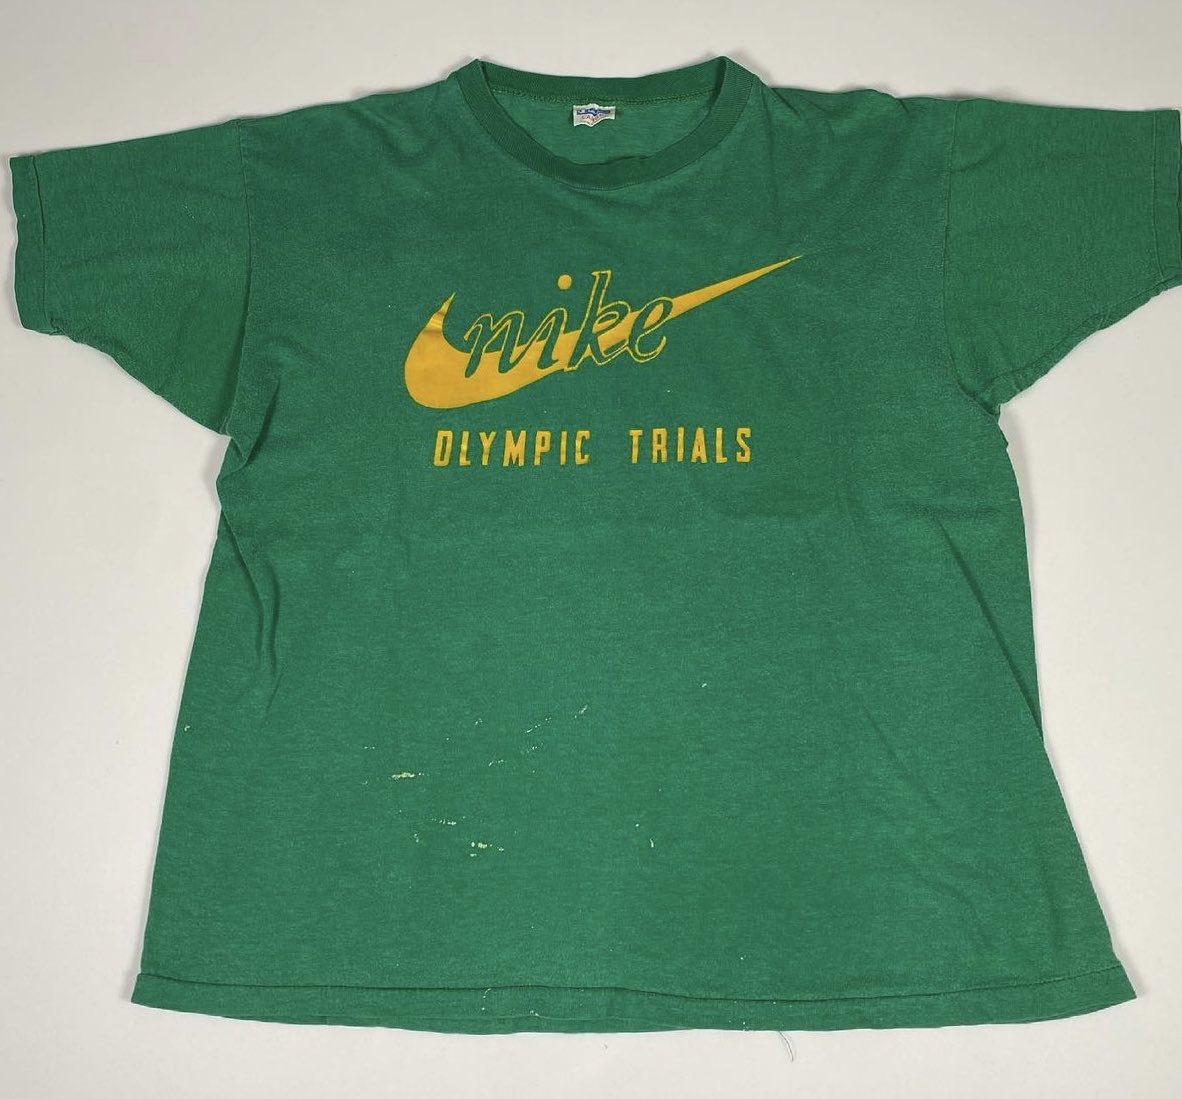 Darren Rovell on Twitter: "The evolution of On the left is Nike's first apparel item ever — a T shirt for the 1972 Olympic Trials On the is